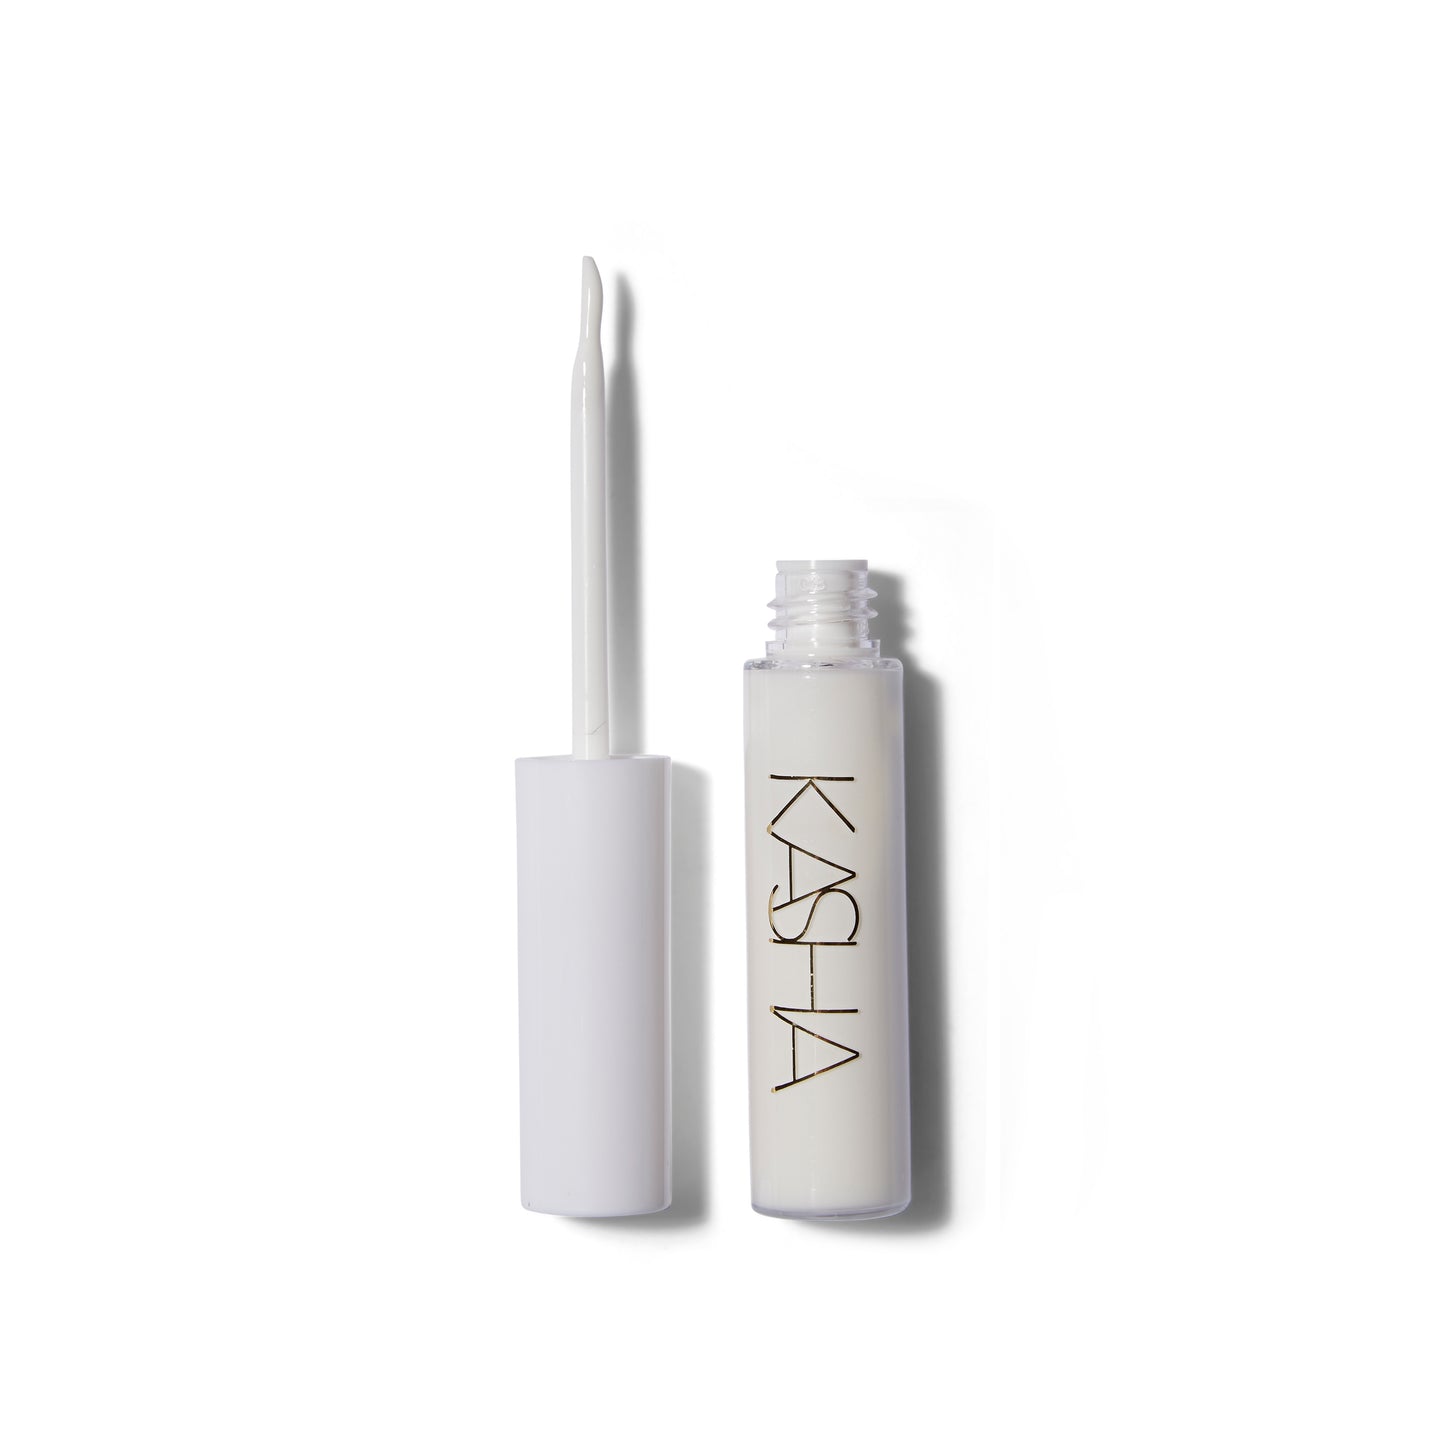 Open view of the Kasha Eyelash Glue. The brush is open and to the left of tube. The brush is pointed and the glue is white.